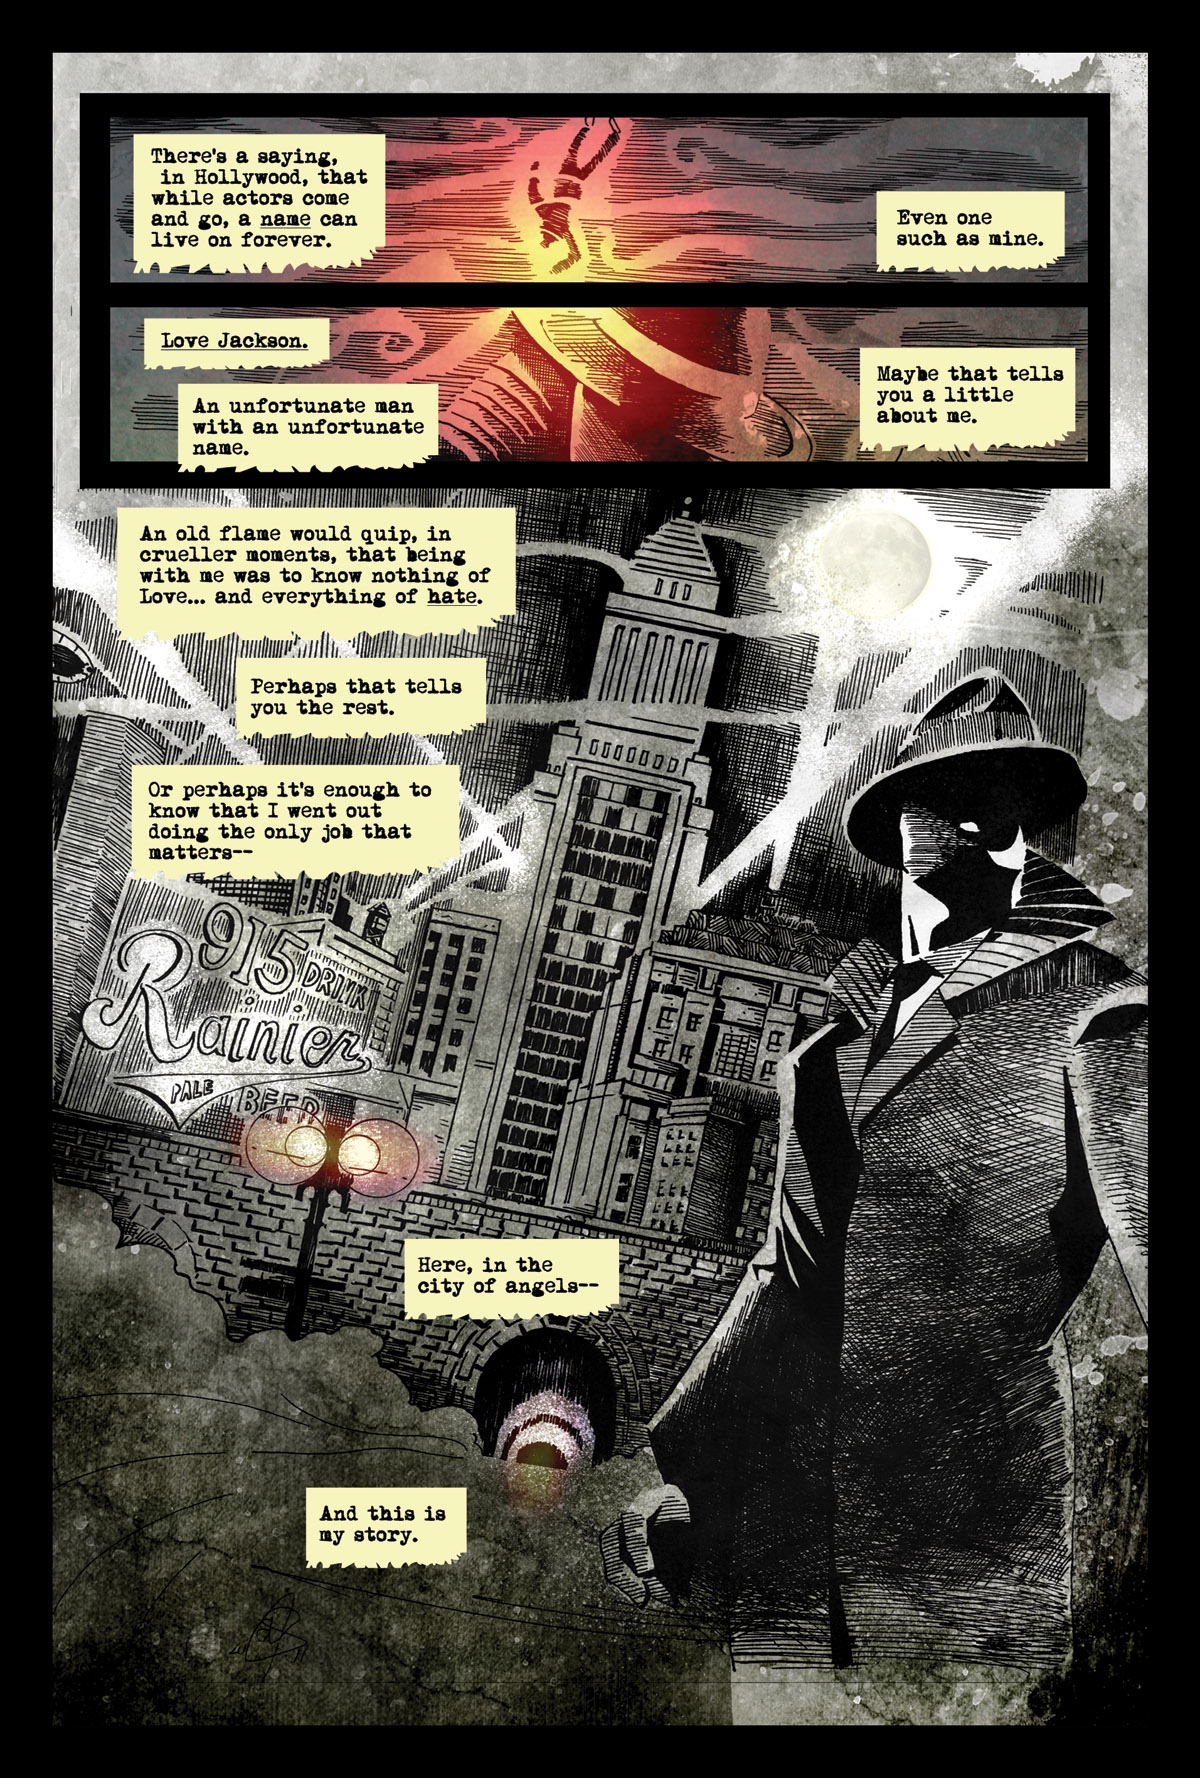 Afterlife Inc. | Silver Screen | Page 1